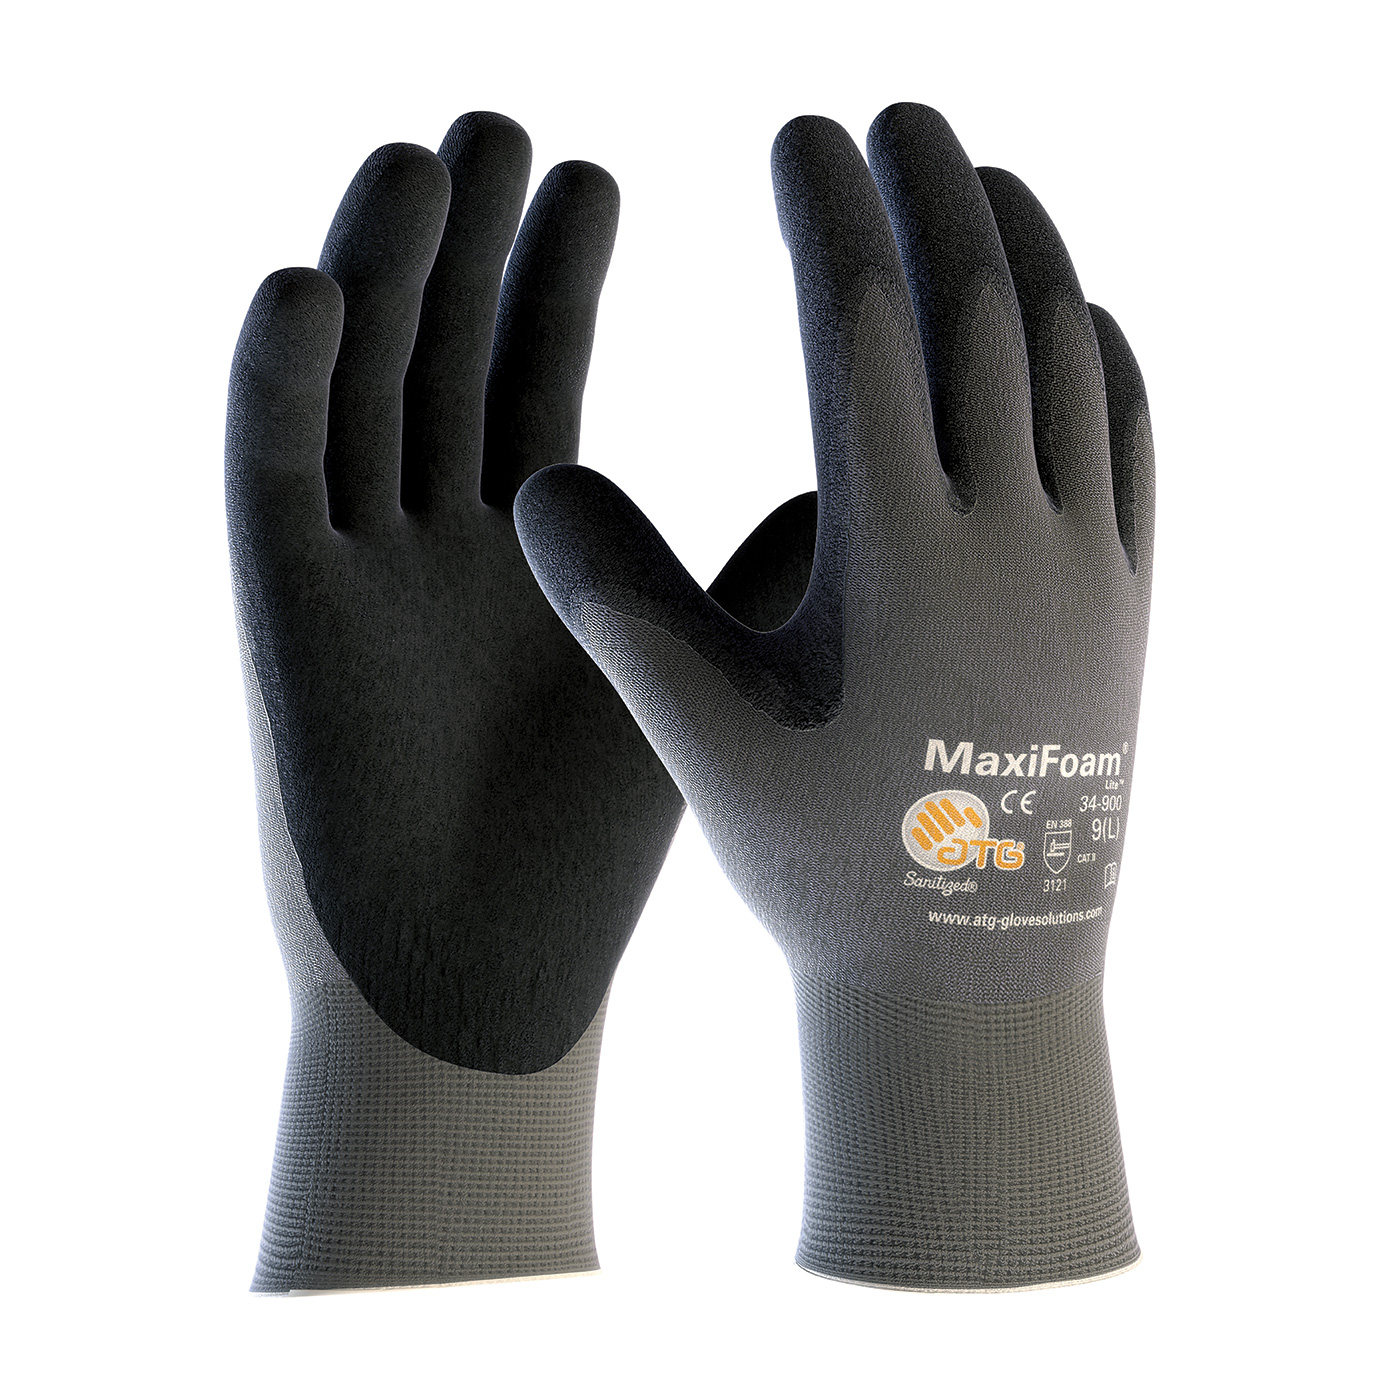 PIP 34-900/XL MaxiFoam Lite Seamless Knit Nylon Glove with Nitrile Coated Foam Grip on Palm & Finger - X-Large PID-34 900 XL